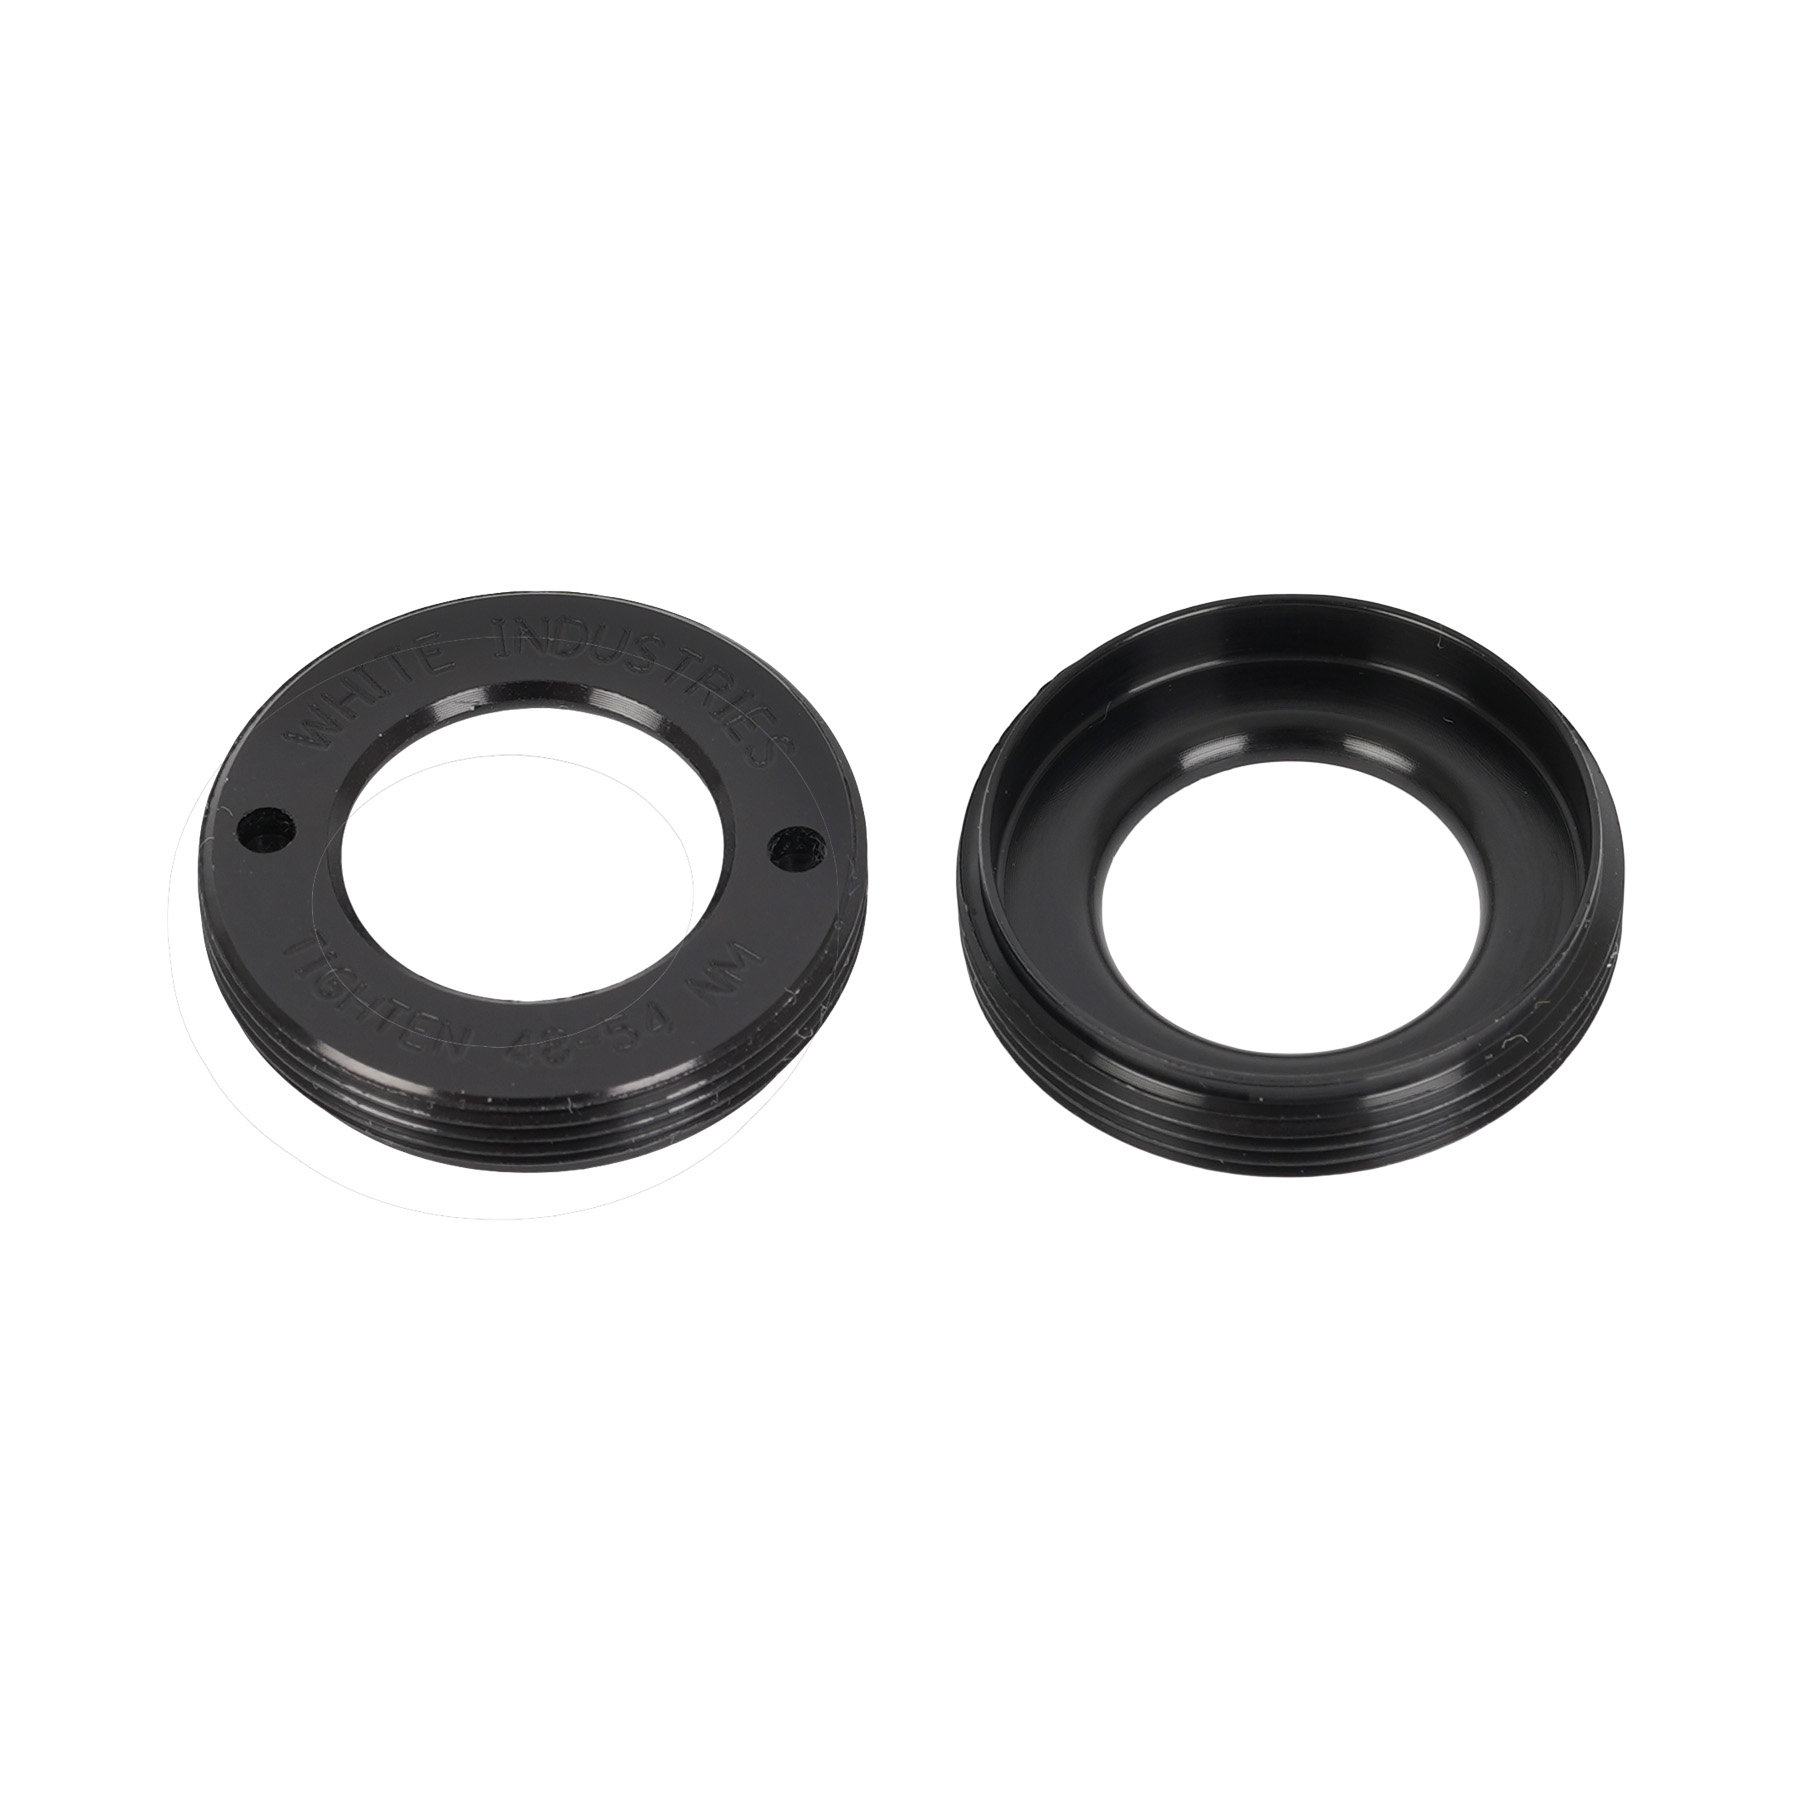 Image of White Industries Extractor Caps for M30, G30, R30 Cranks - black